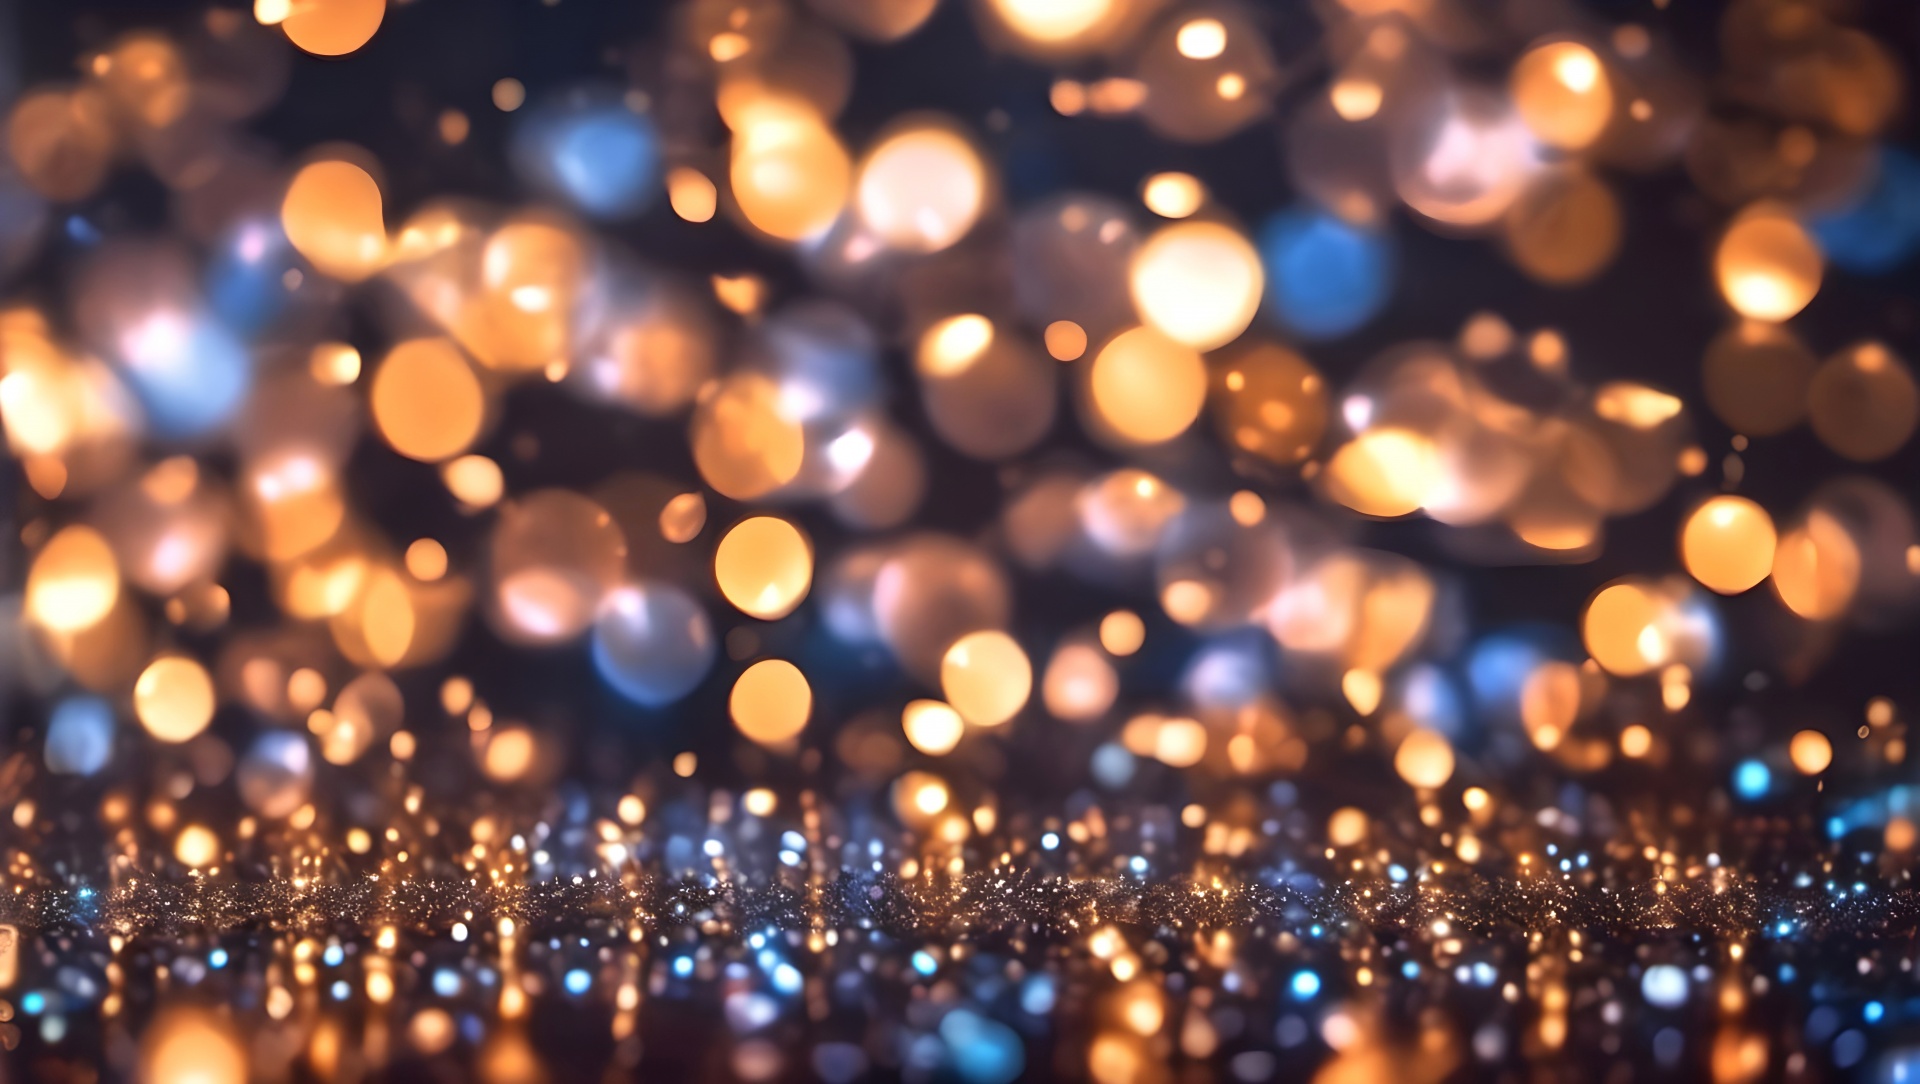 Abstract Bokeh Background Texture Free Stock Photo - Public Domain Pictures